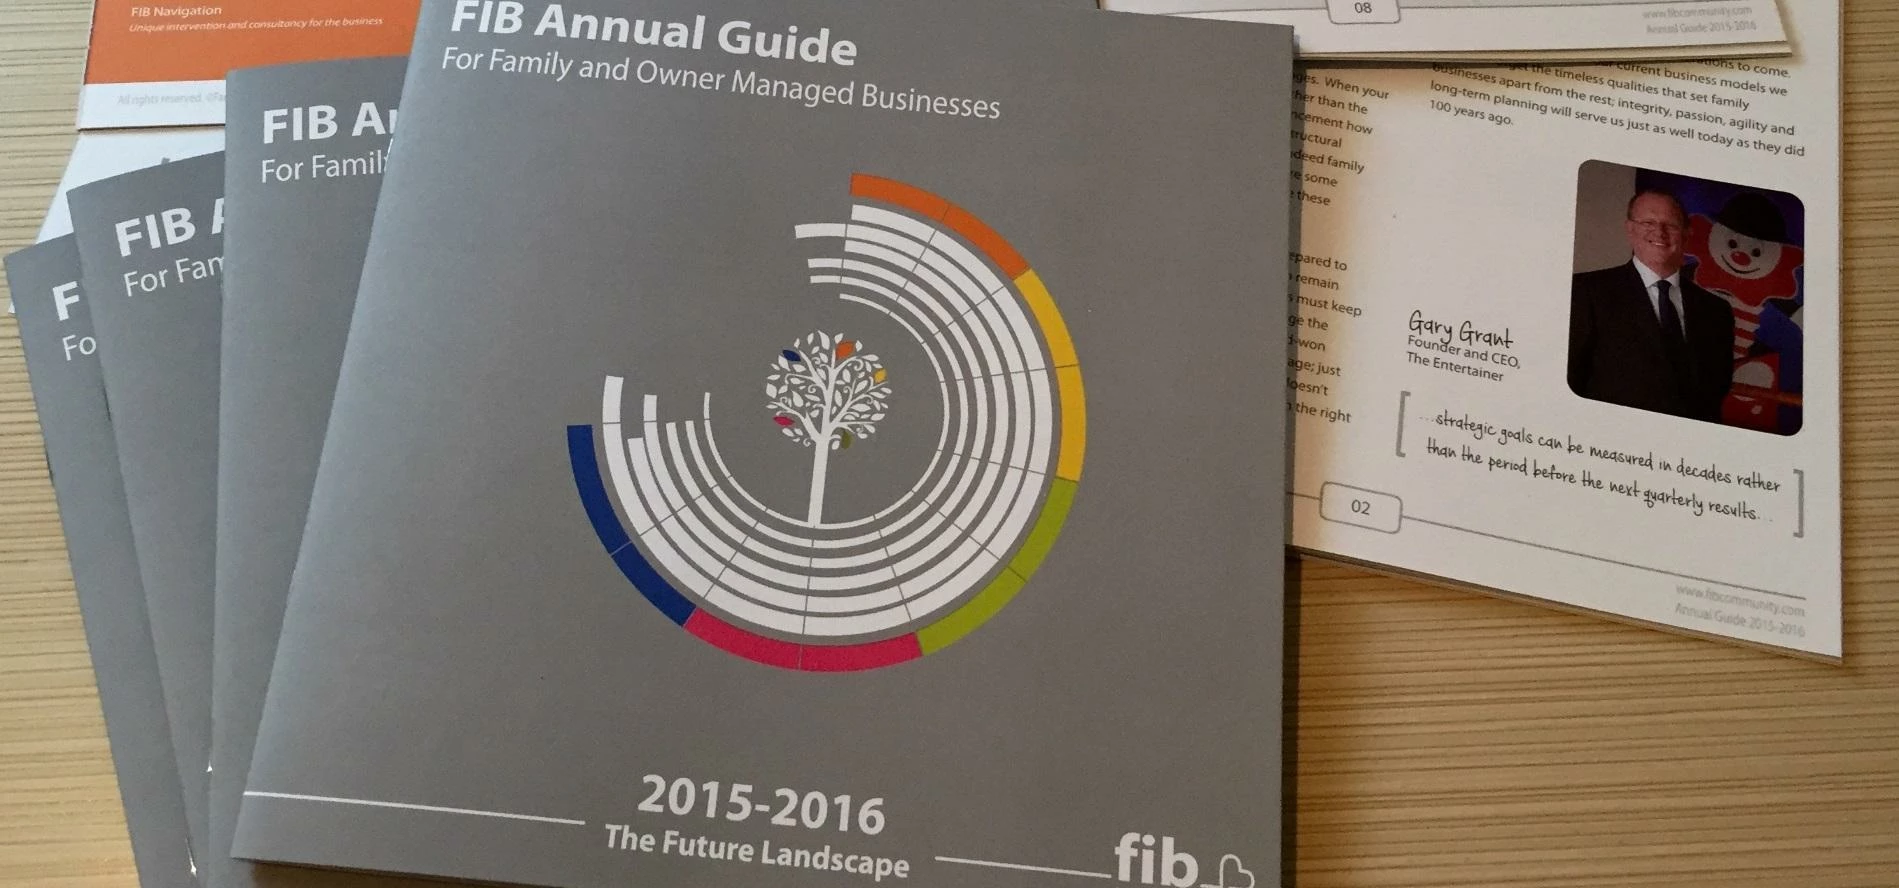 The Future Landscape - Families in Business 2015-2016 Annual Guide